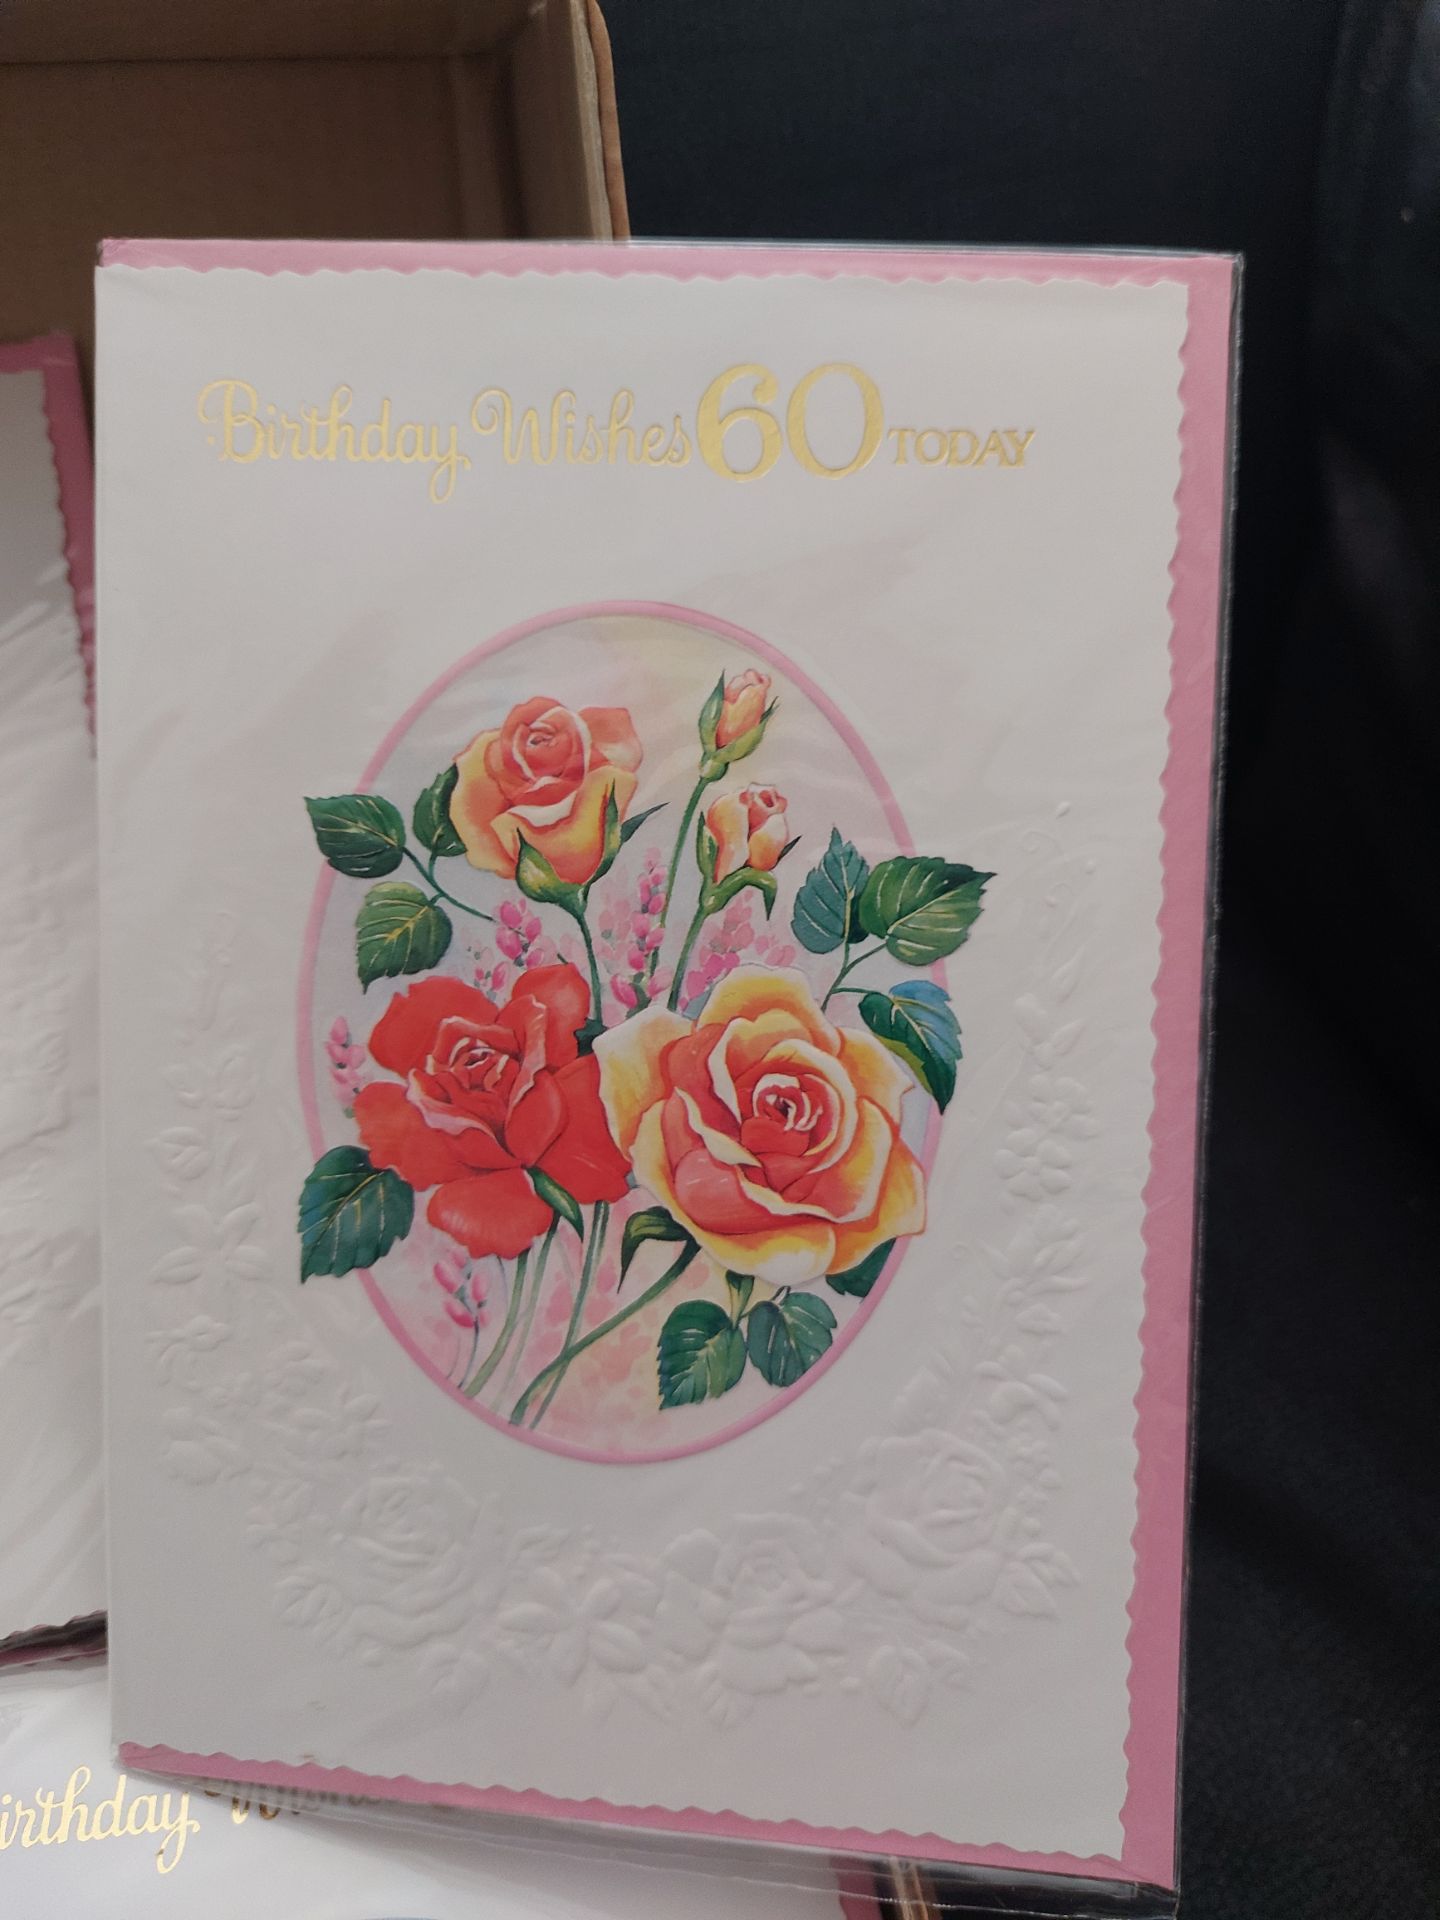 Box of 60th Birthday Cards - Image 5 of 5